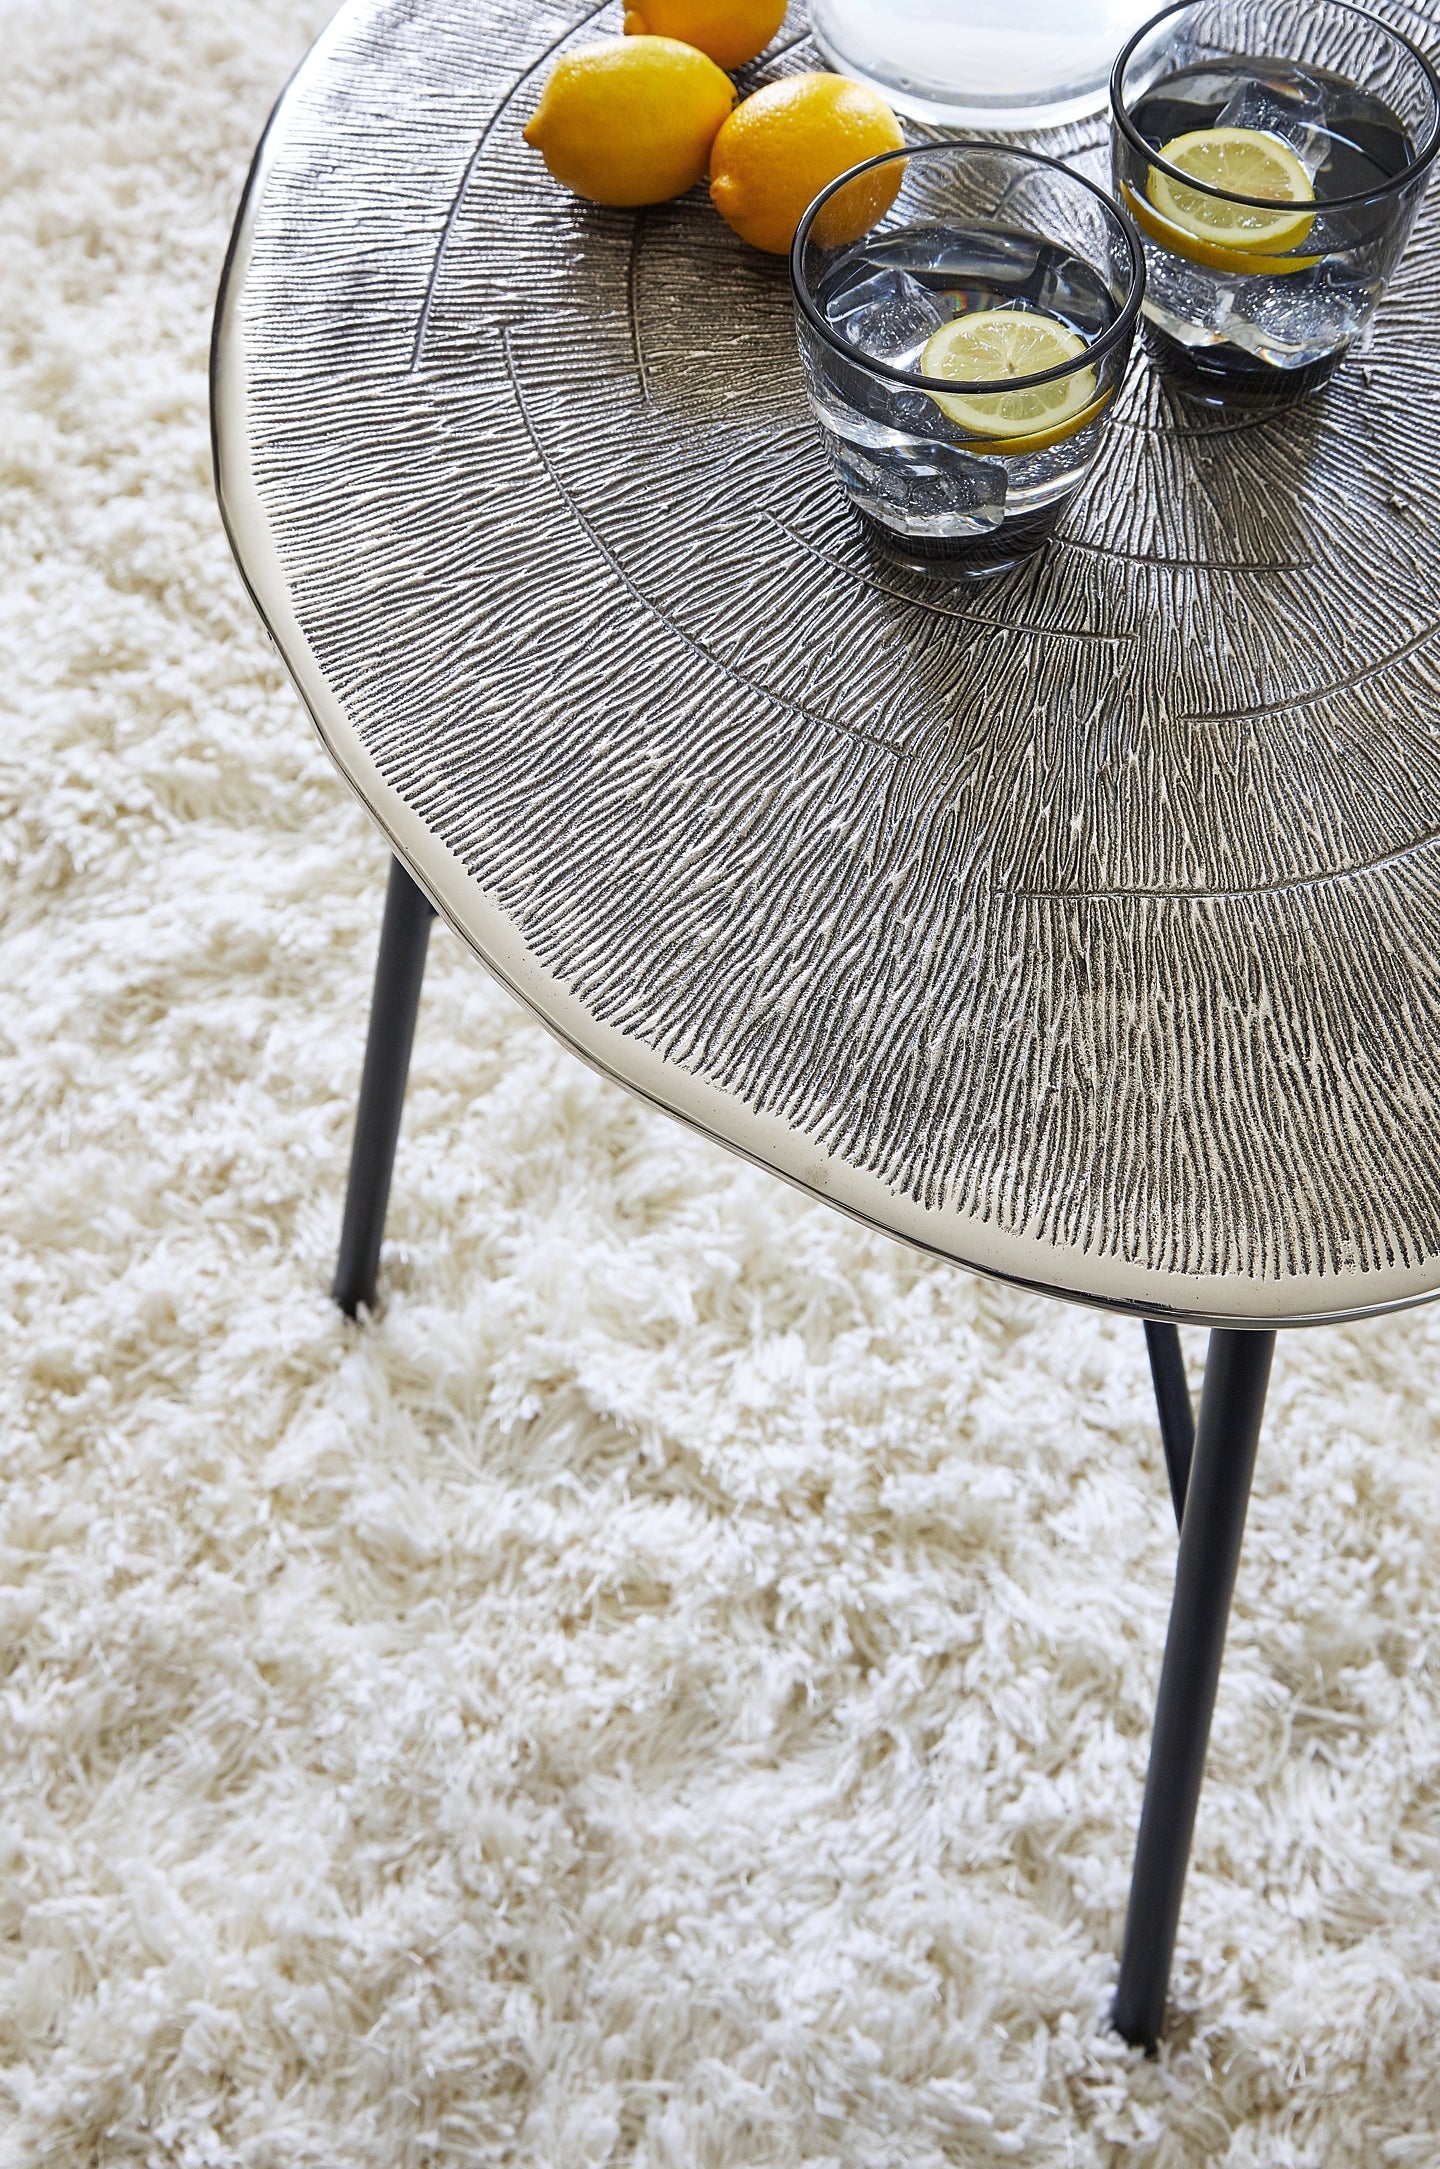 Laverford Round End Table at Cloud 9 Mattress & Furniture furniture, home furnishing, home decor